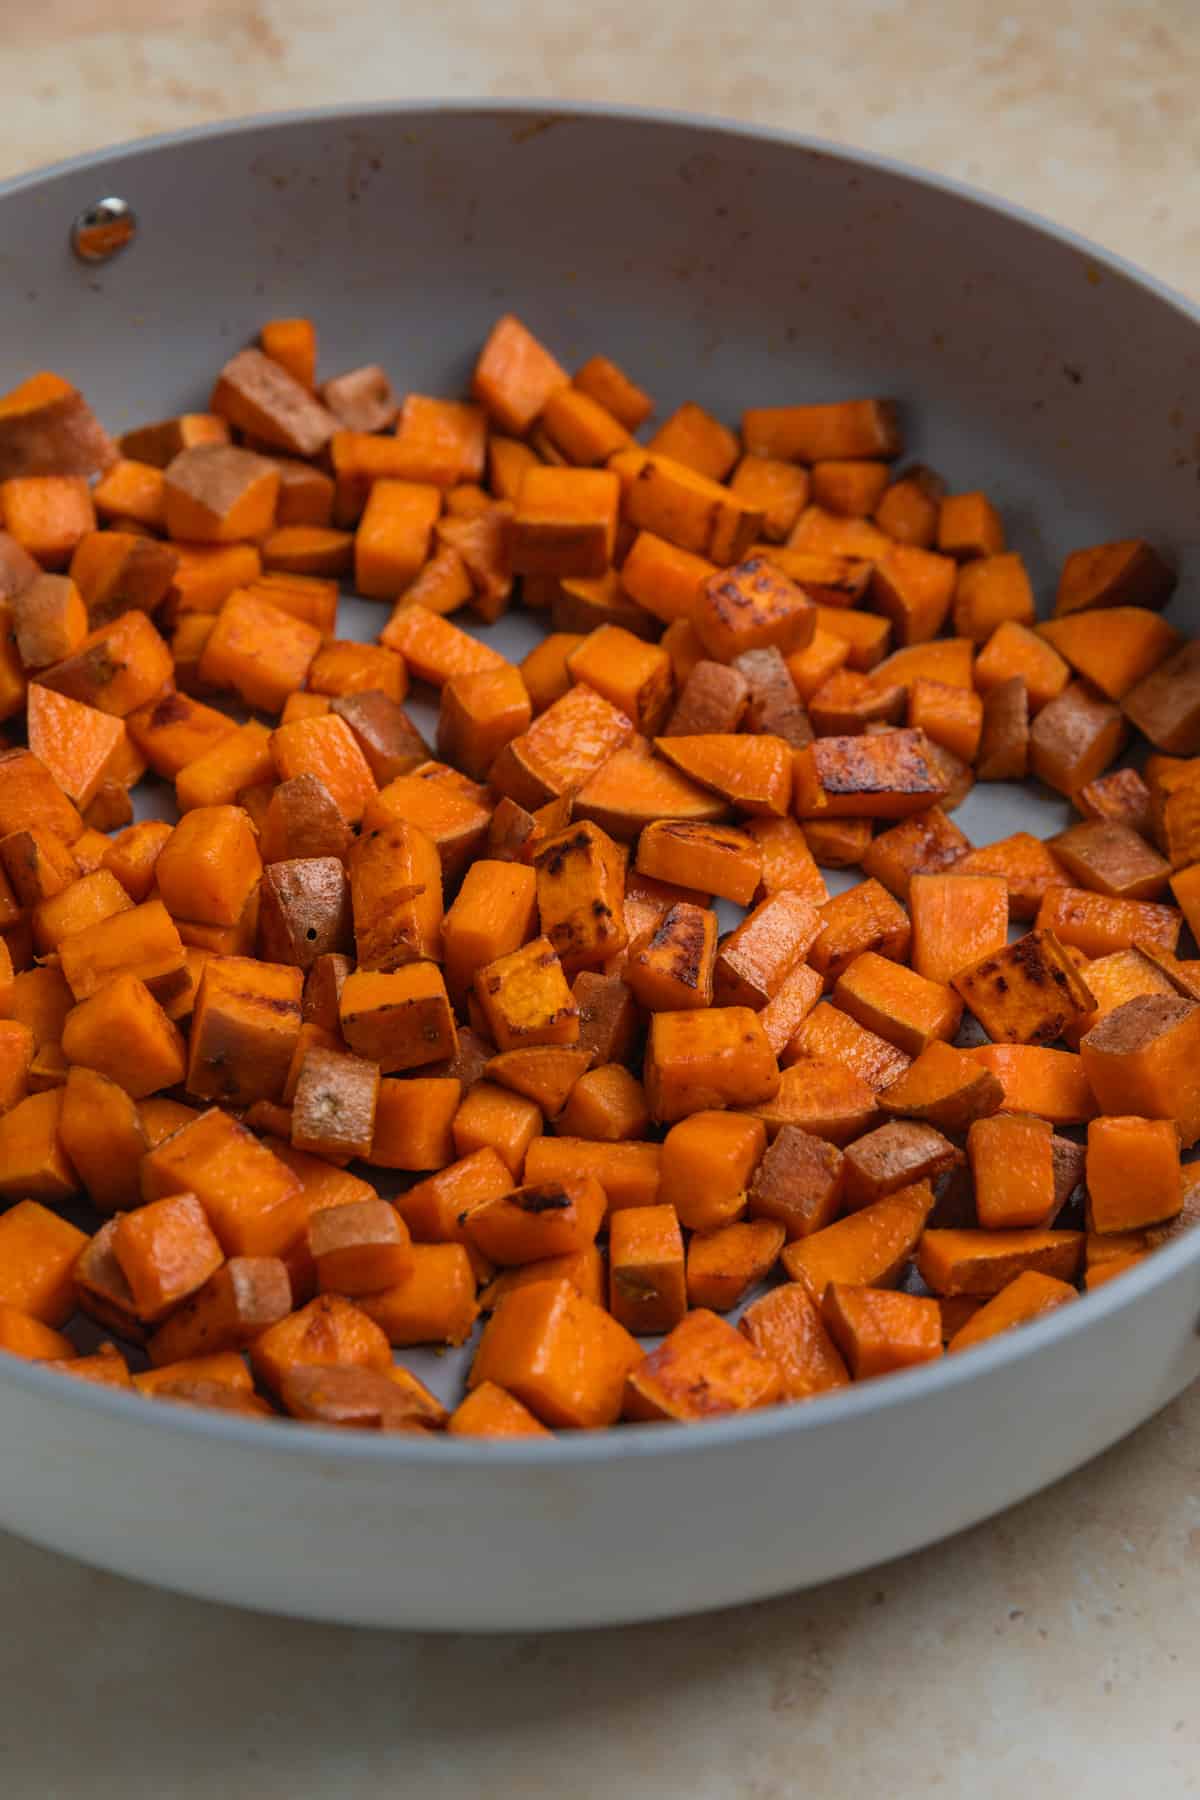 Sweet potatoes cooked in an even layer in skillet.